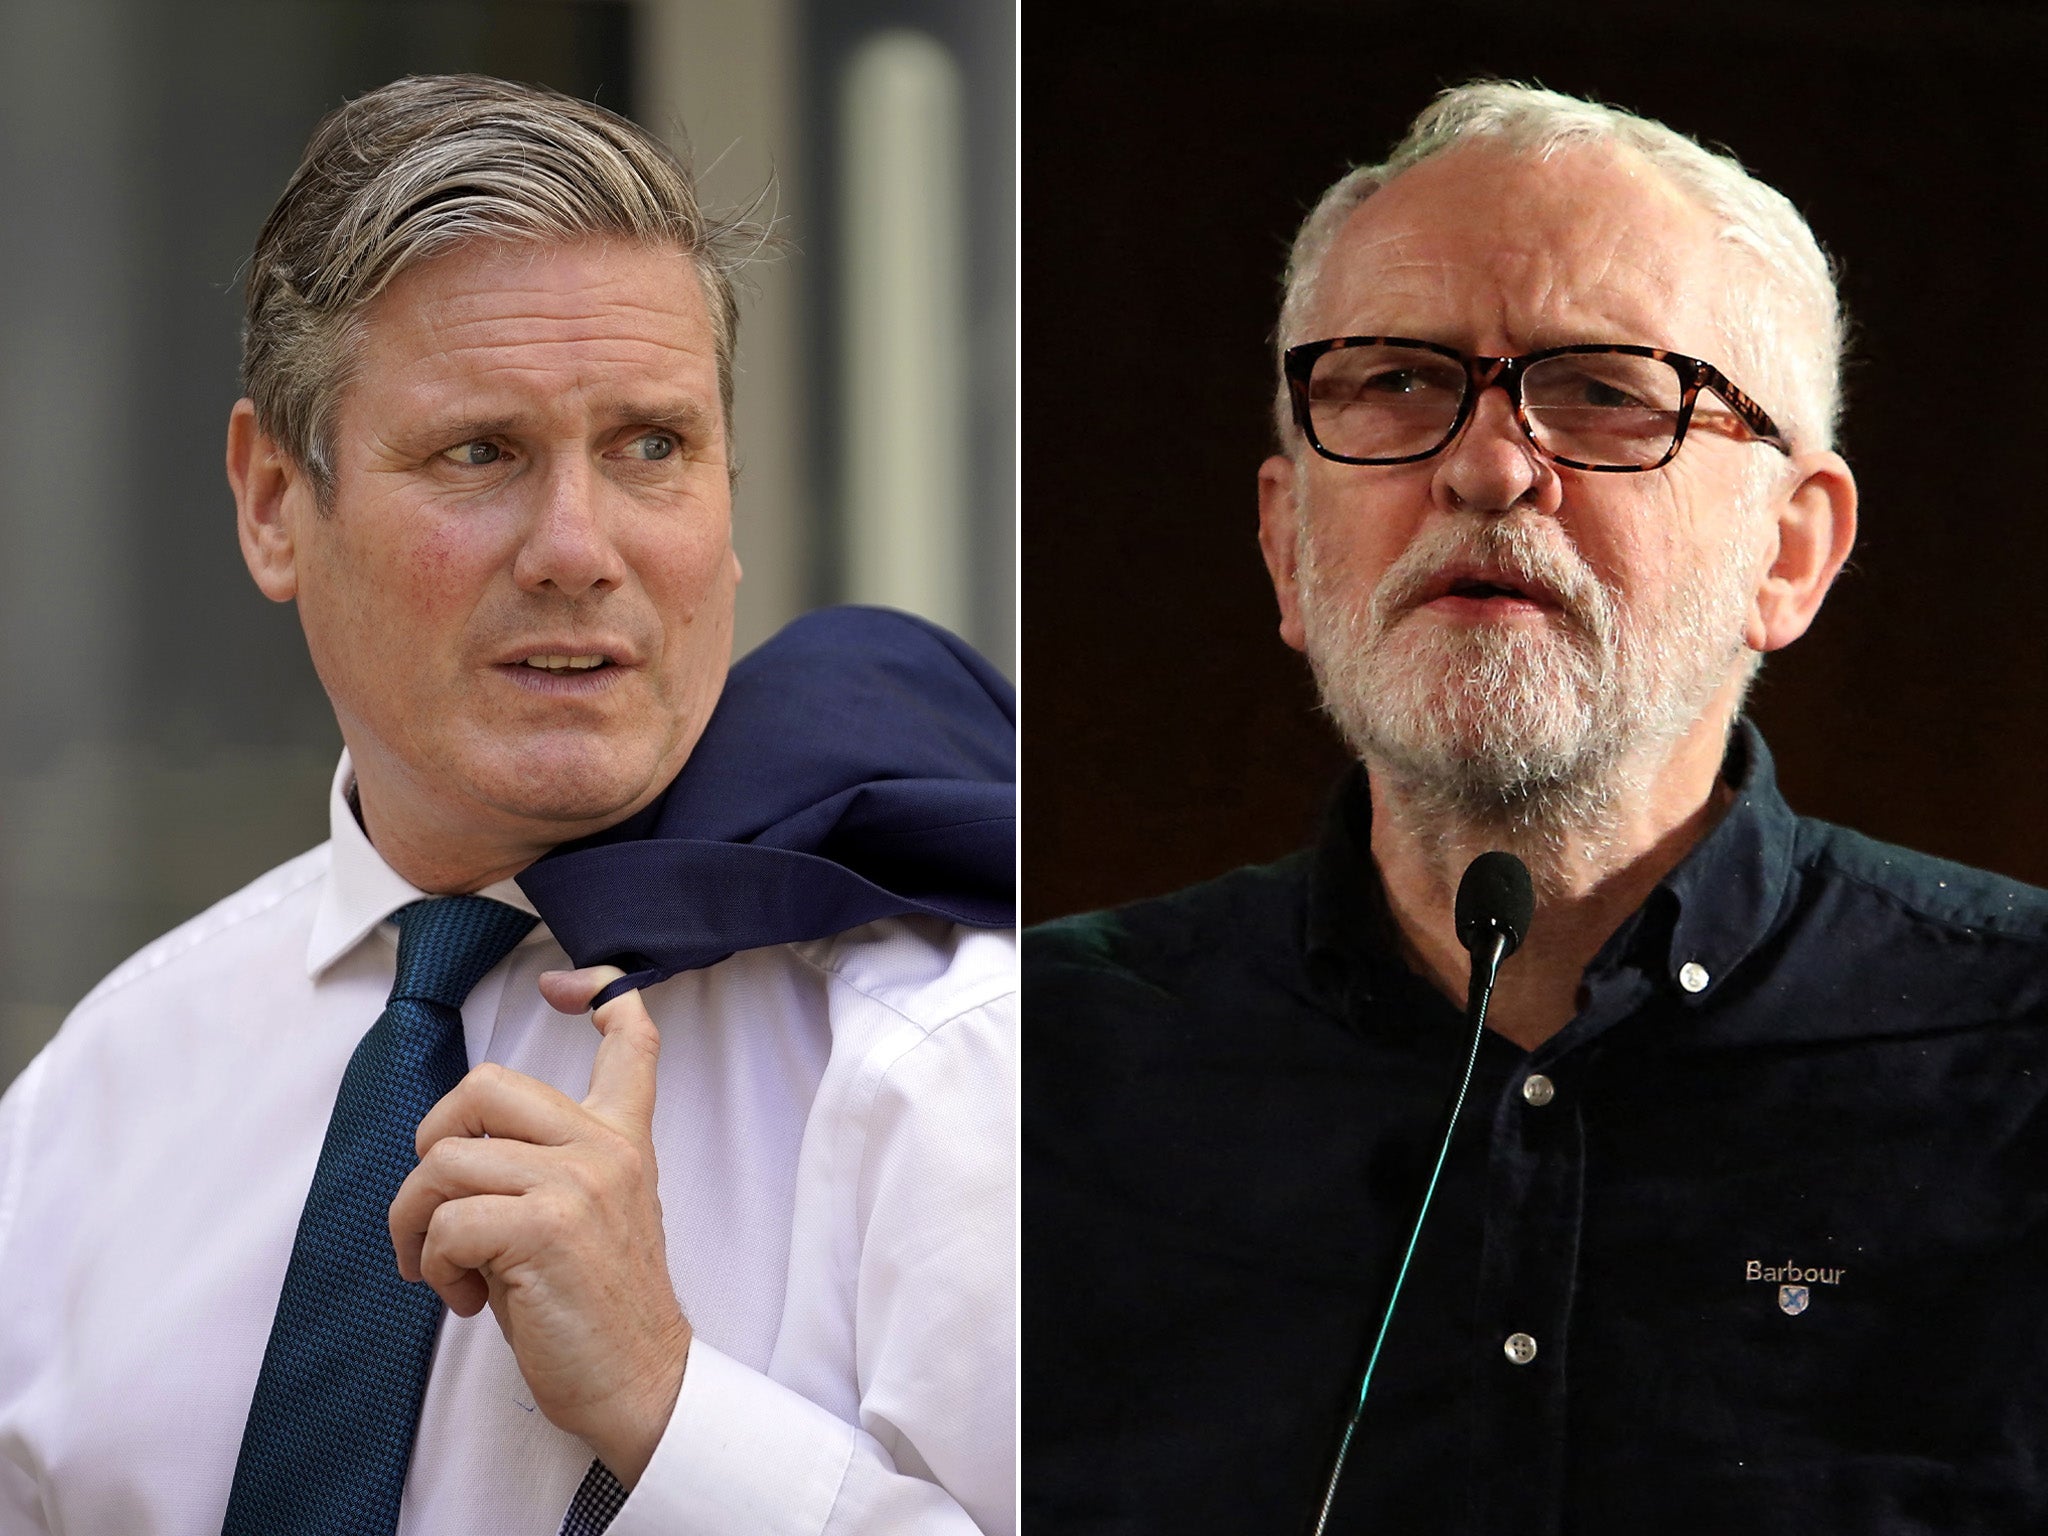 Keir Starmer has said only Jeremy Corbyn is to blame for his exclusion from Labour